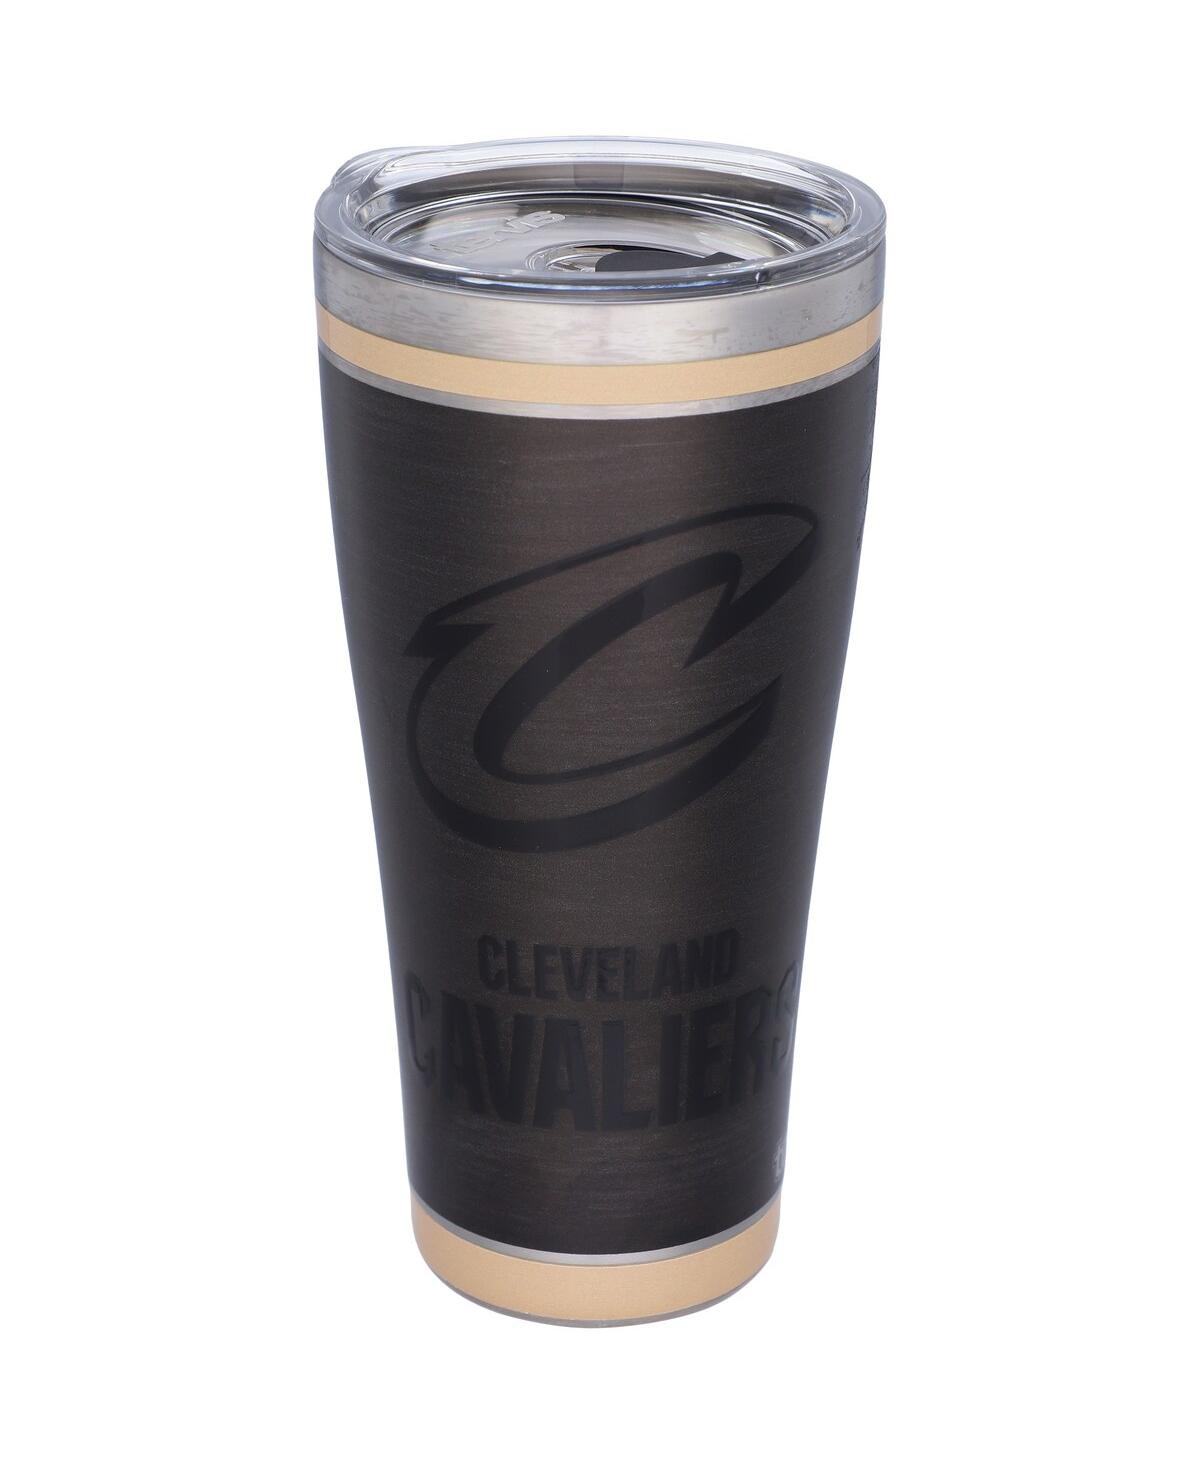 Tervis Tumbler Cleveland Cavaliers 30 oz Blackout Stainless Steel Tumbler